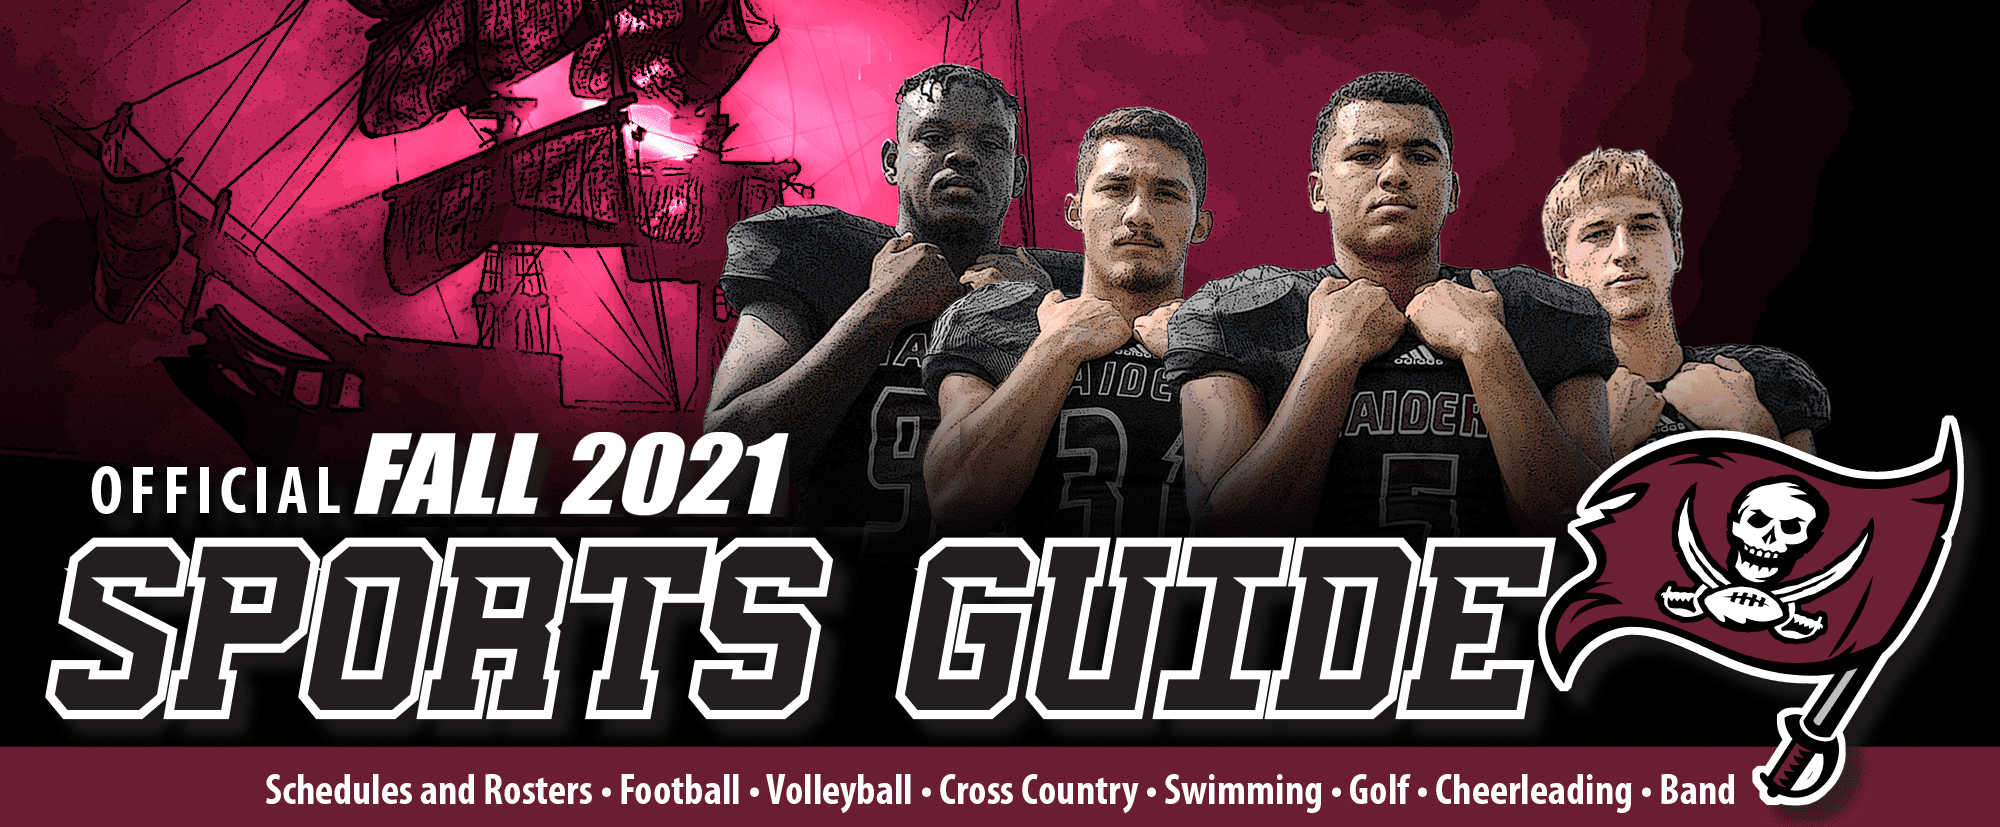 Official Fall 2021 Sports Guide Header